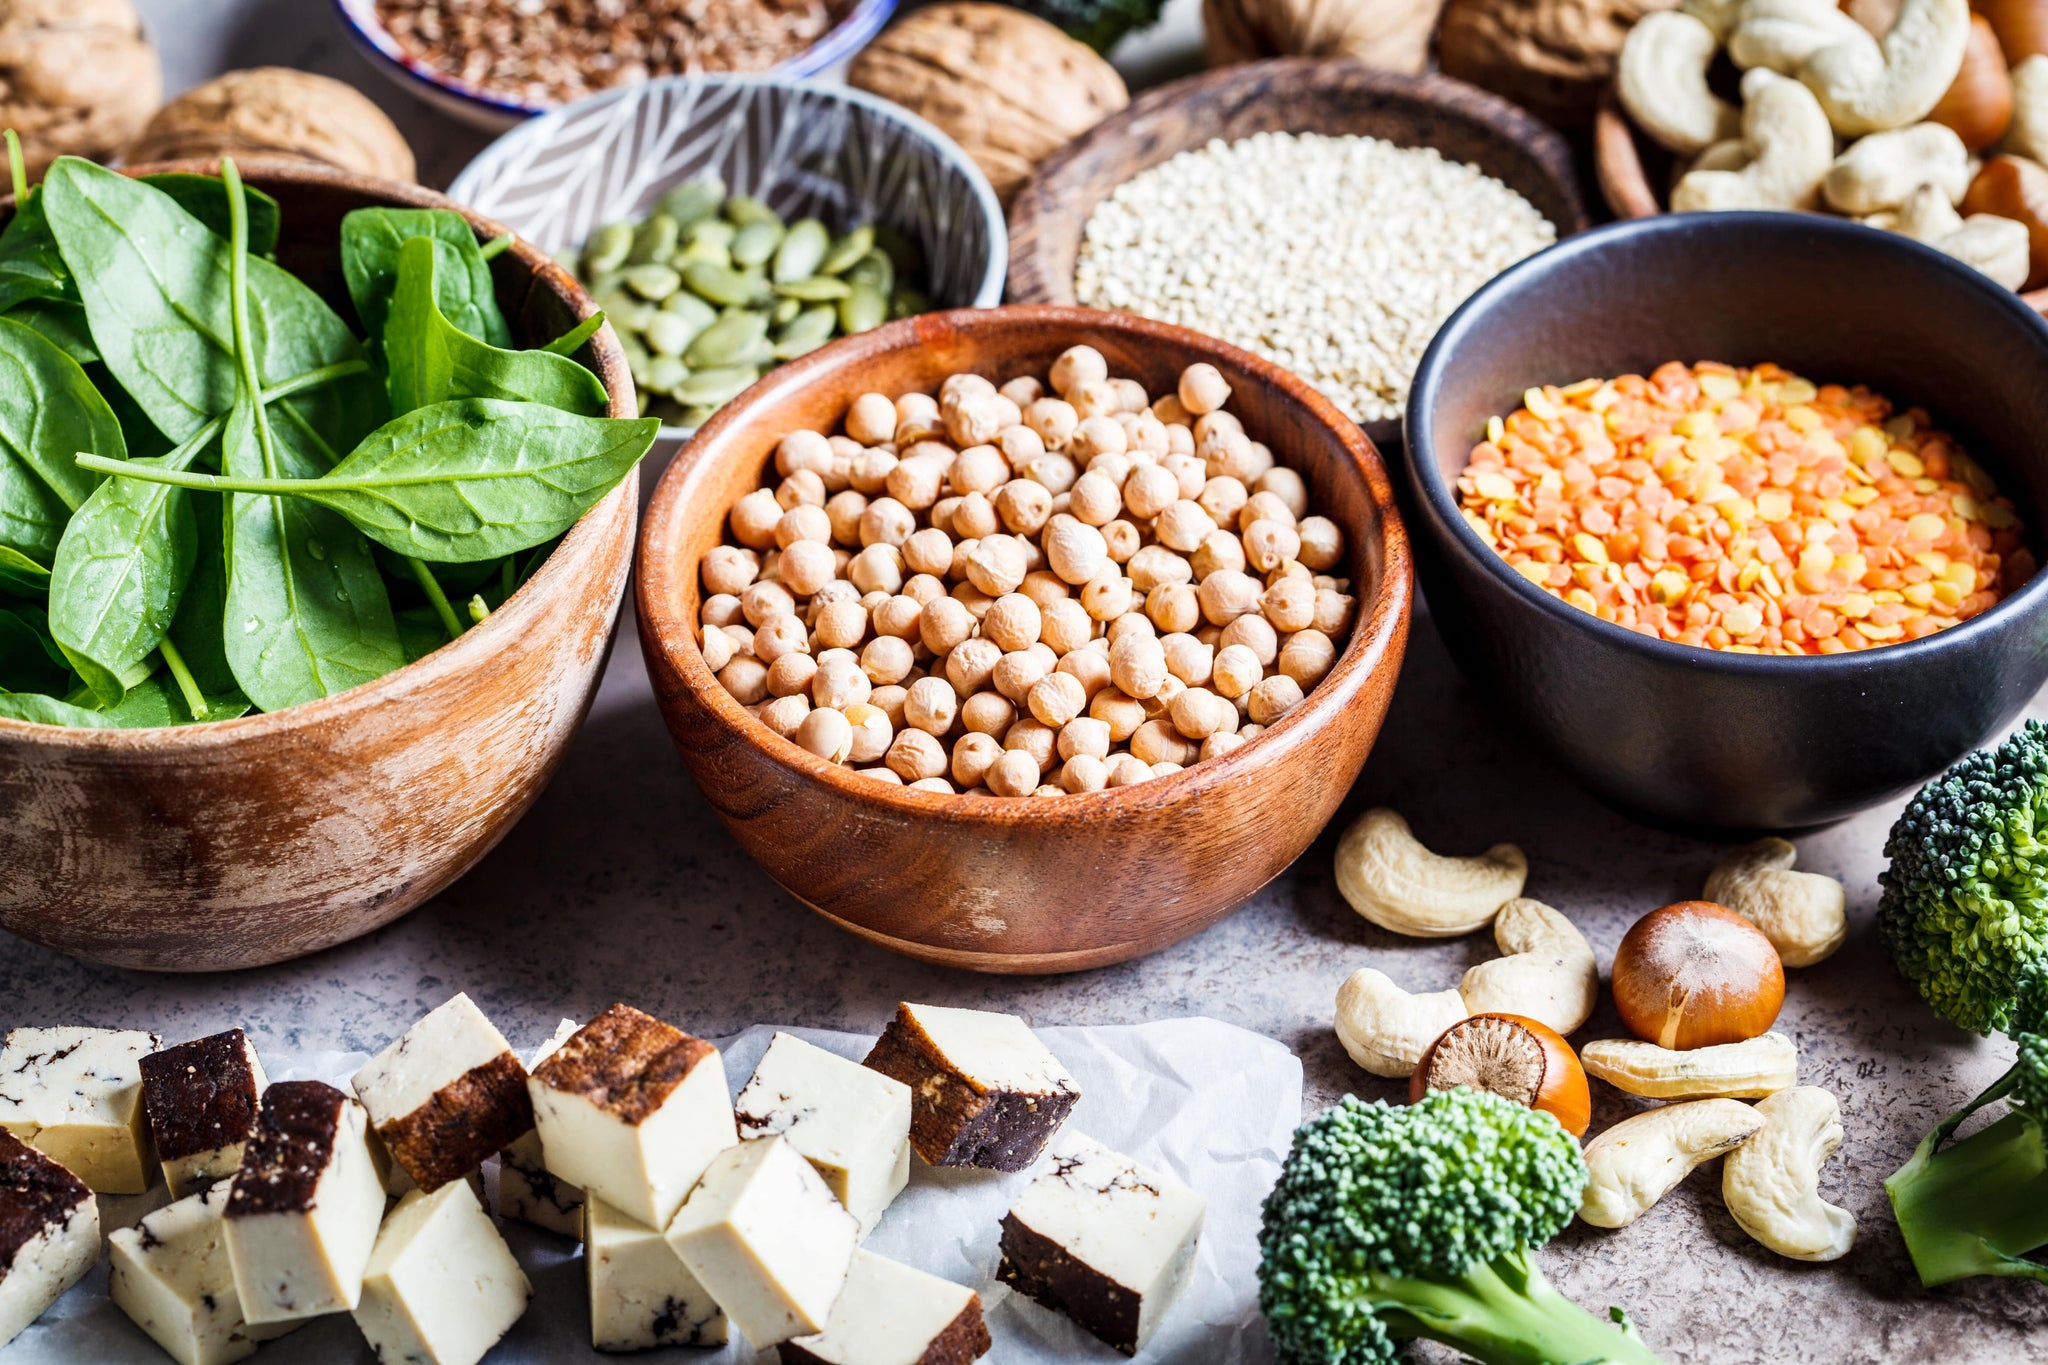 Complete vs incomplete proteins: tofu, chickpeas, lentils, nuts, spinach, and broccoli